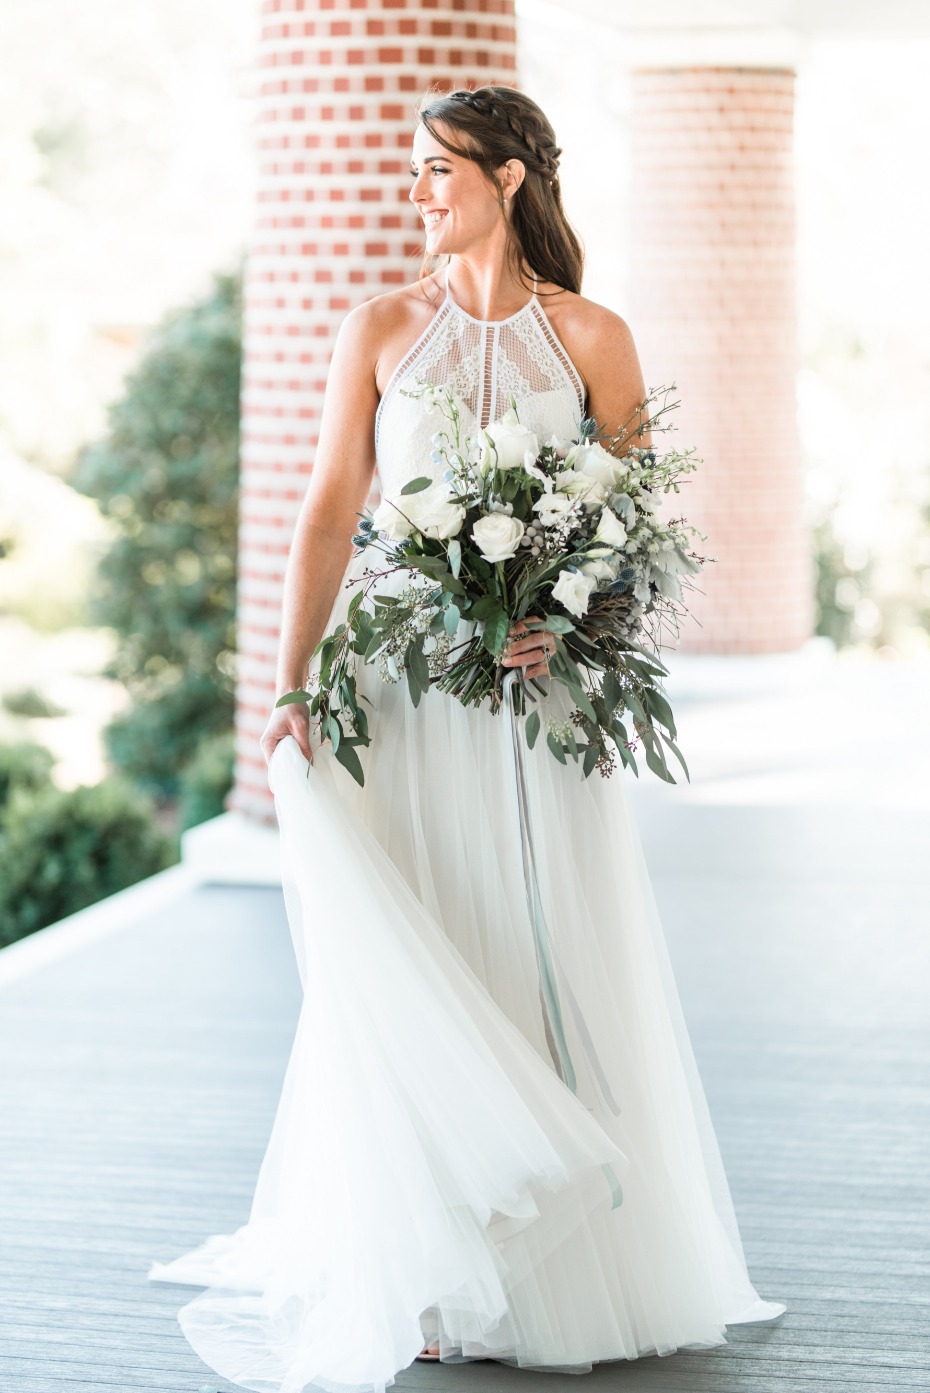 Boho chic bridal look and bouquet